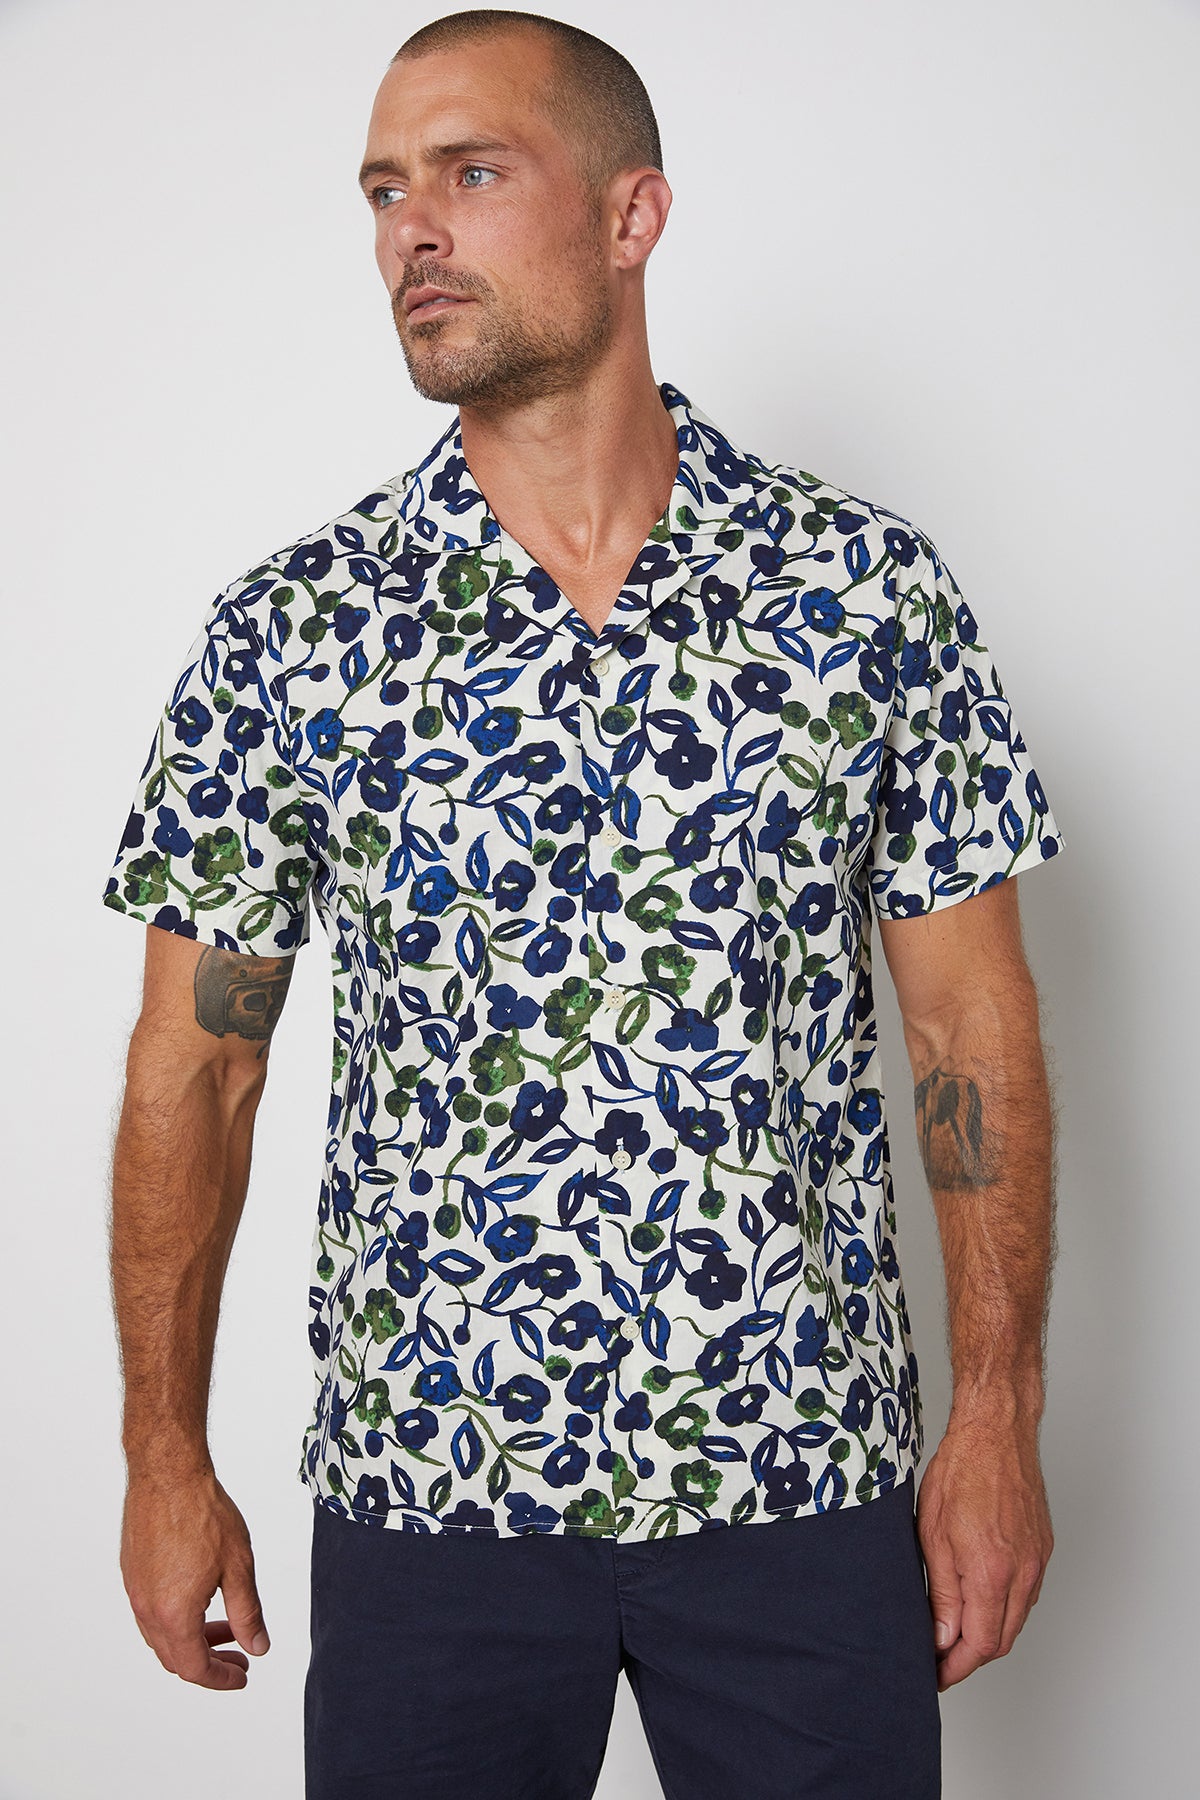   Isaiah button up printed shirt with navy and green flourishes paired with Louis short in navy. 